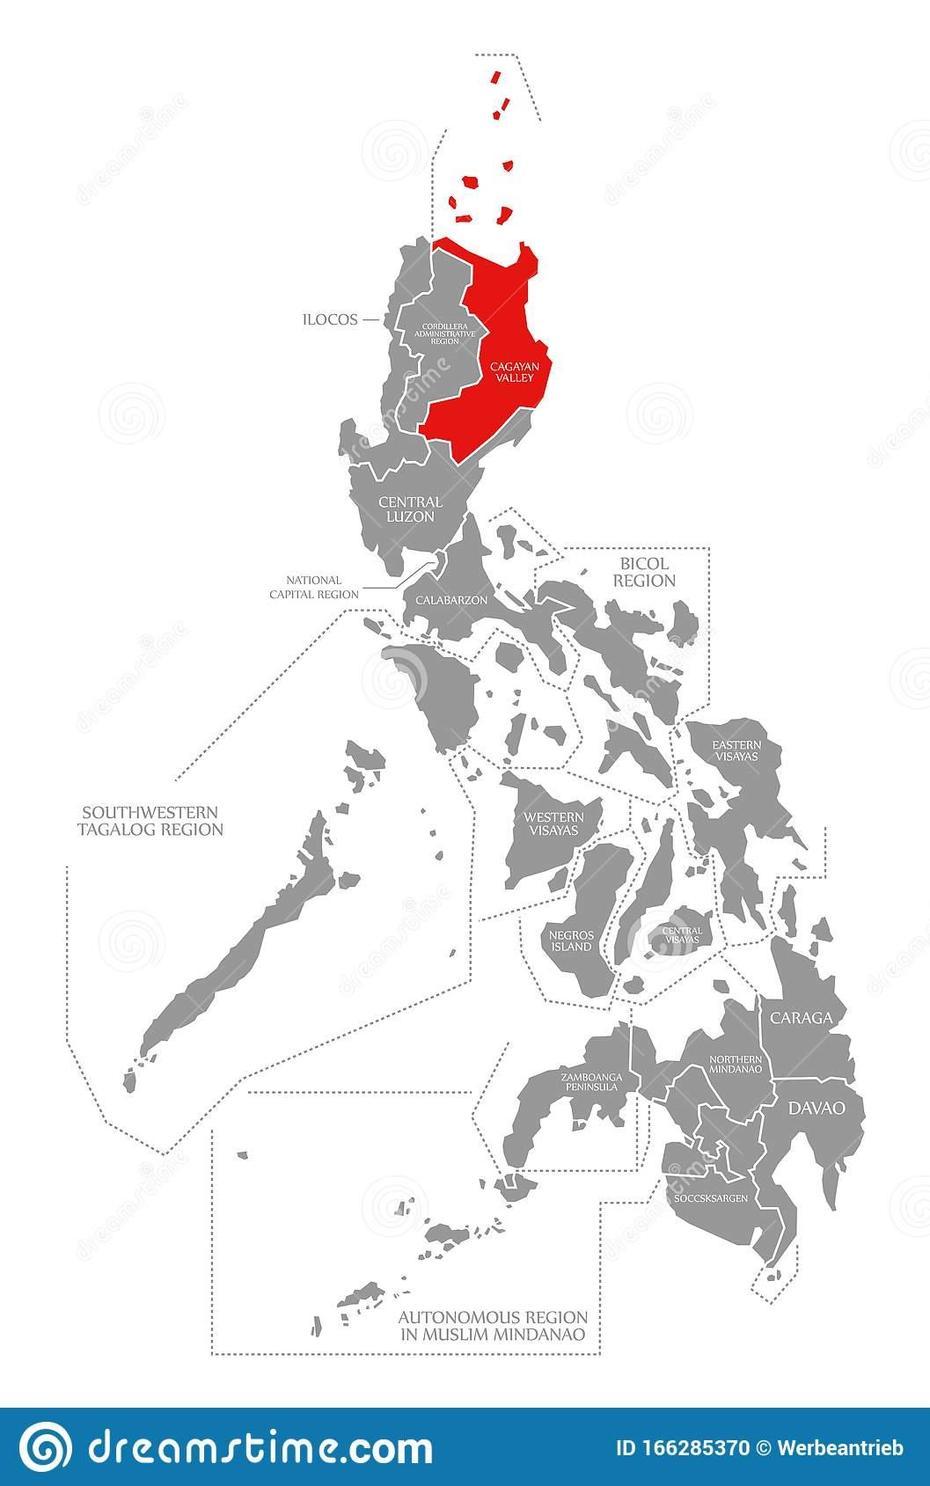 Cagayan Valley Red Highlighted In Map Of Philippines Stock Illustration …, Cuartero, Philippines, Philippines  Luzon Manila, Cebu Island Philippines